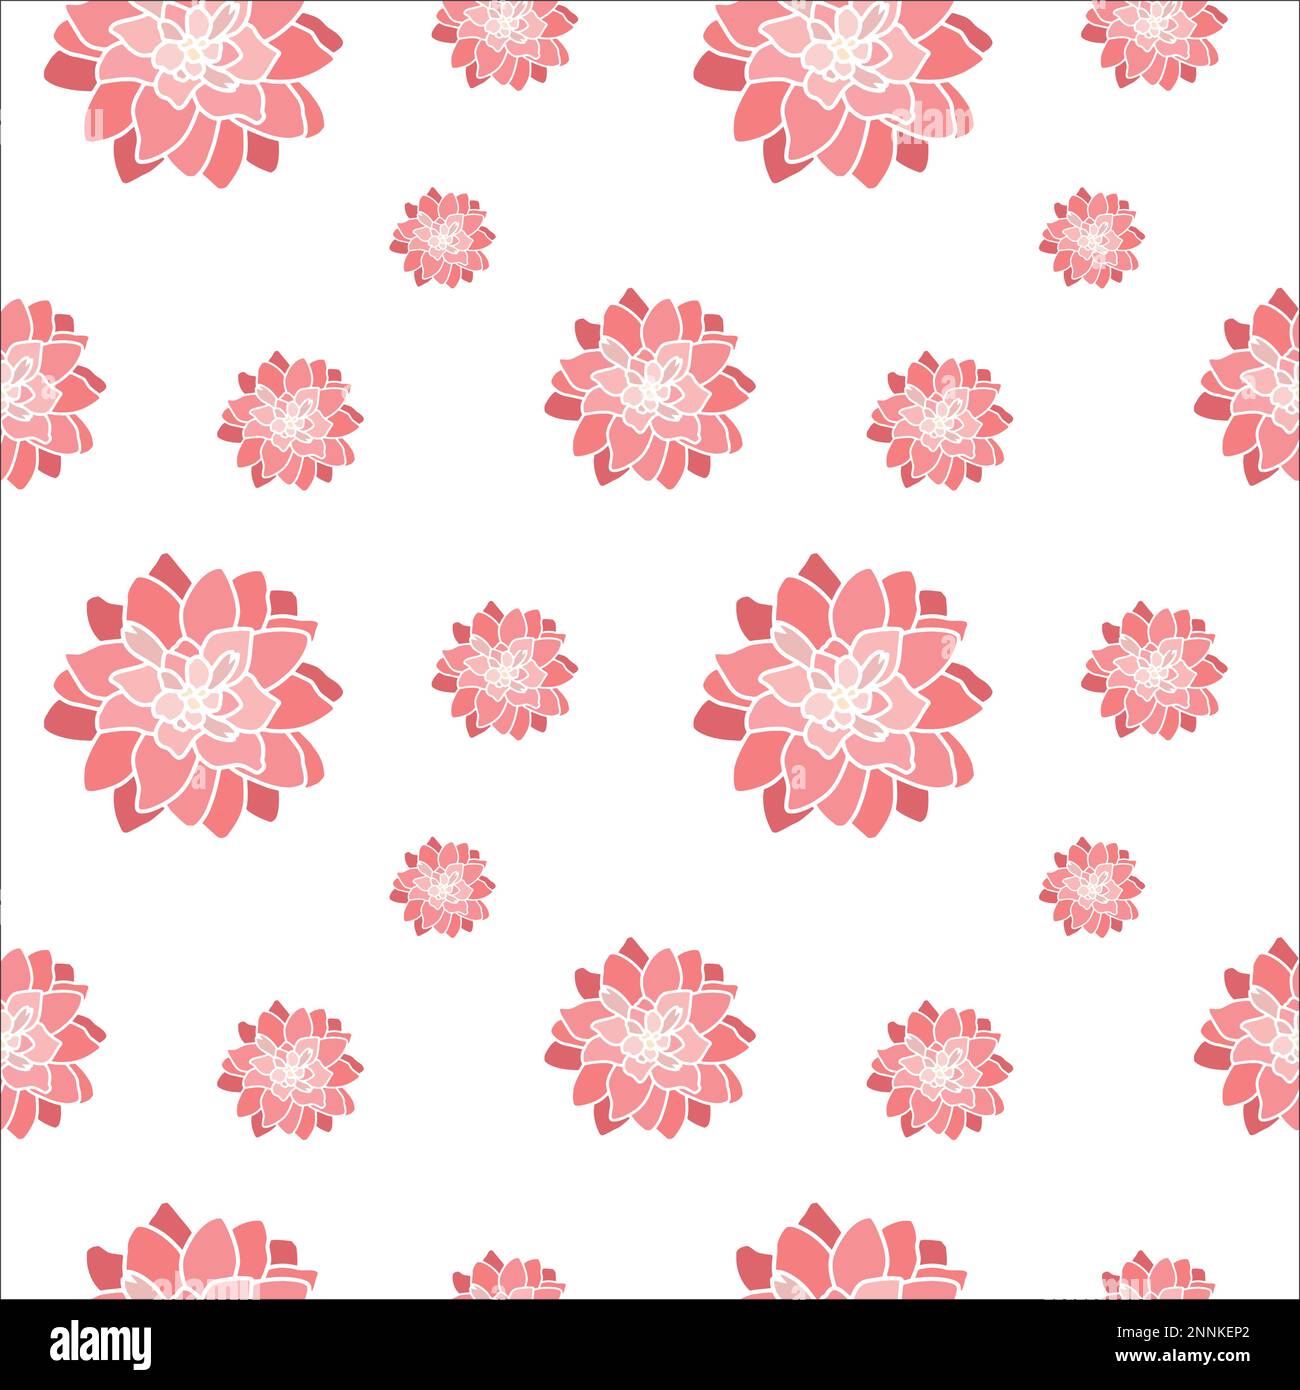 REPEATING PATTERN PINK FLOWERS WITH PINK BACKGROUND Stock Vector